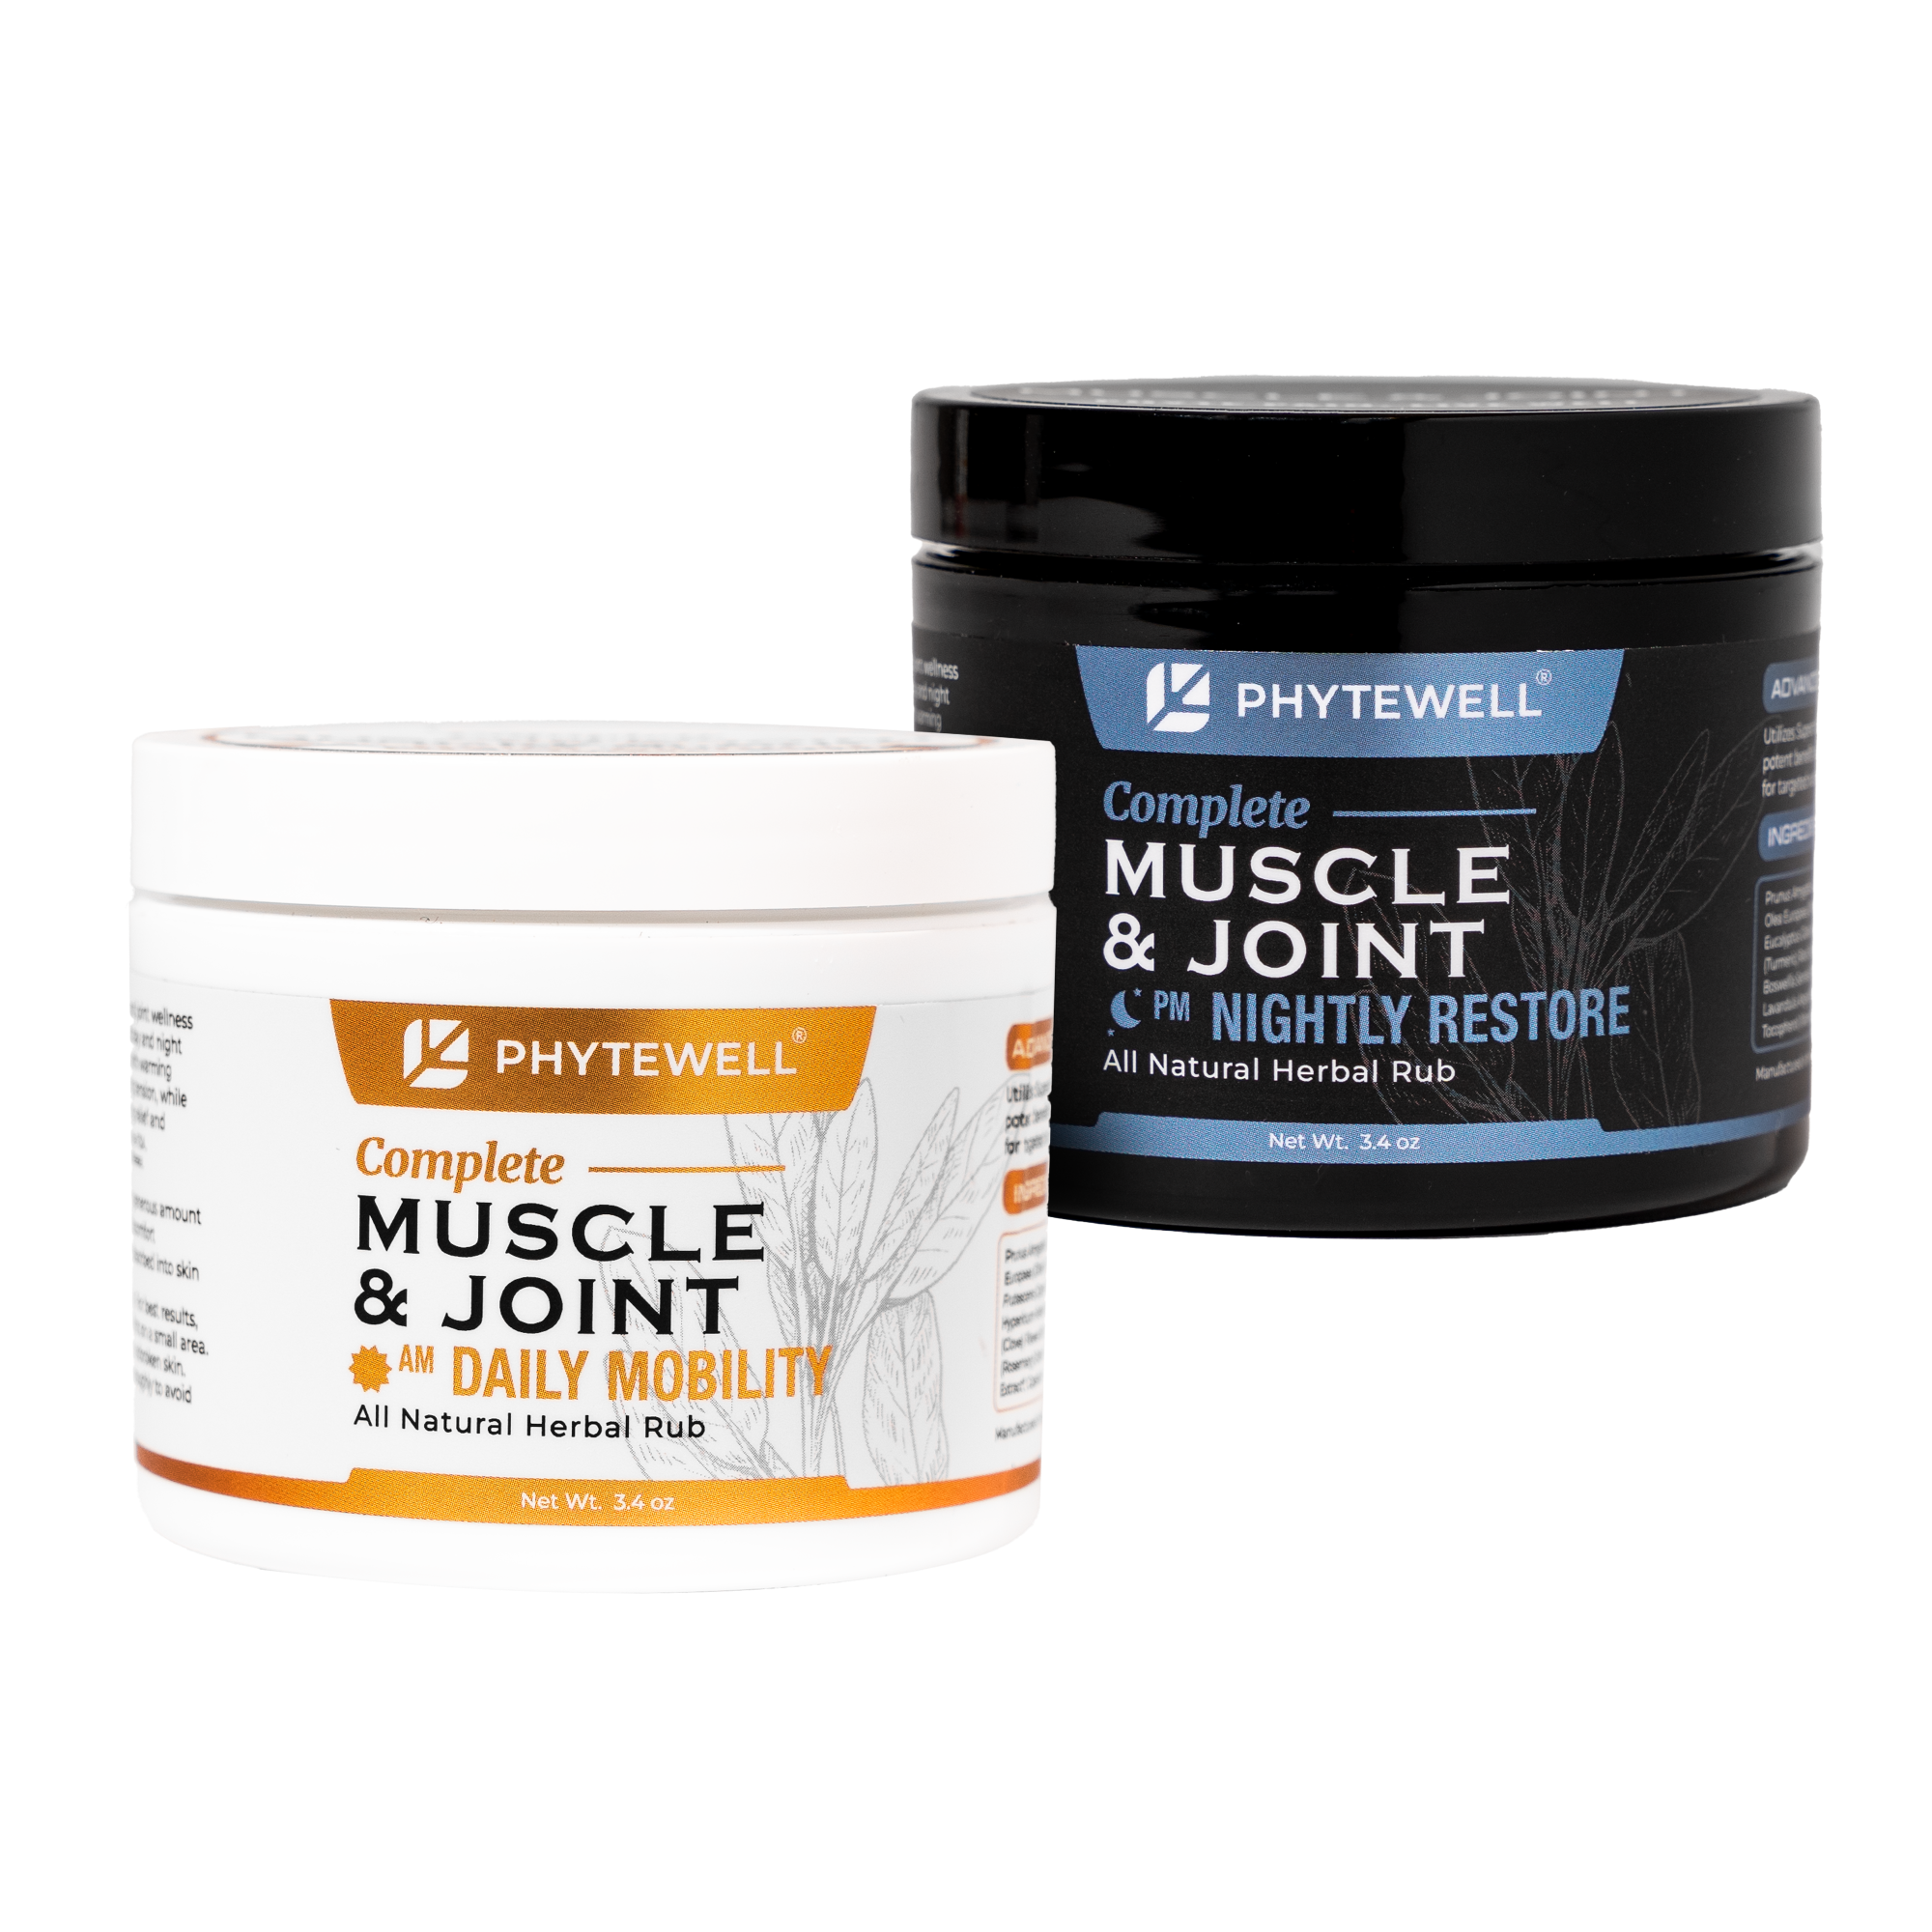 PHYTEWELL Complete Muscle & Joint AM and PM muscle and joint rub